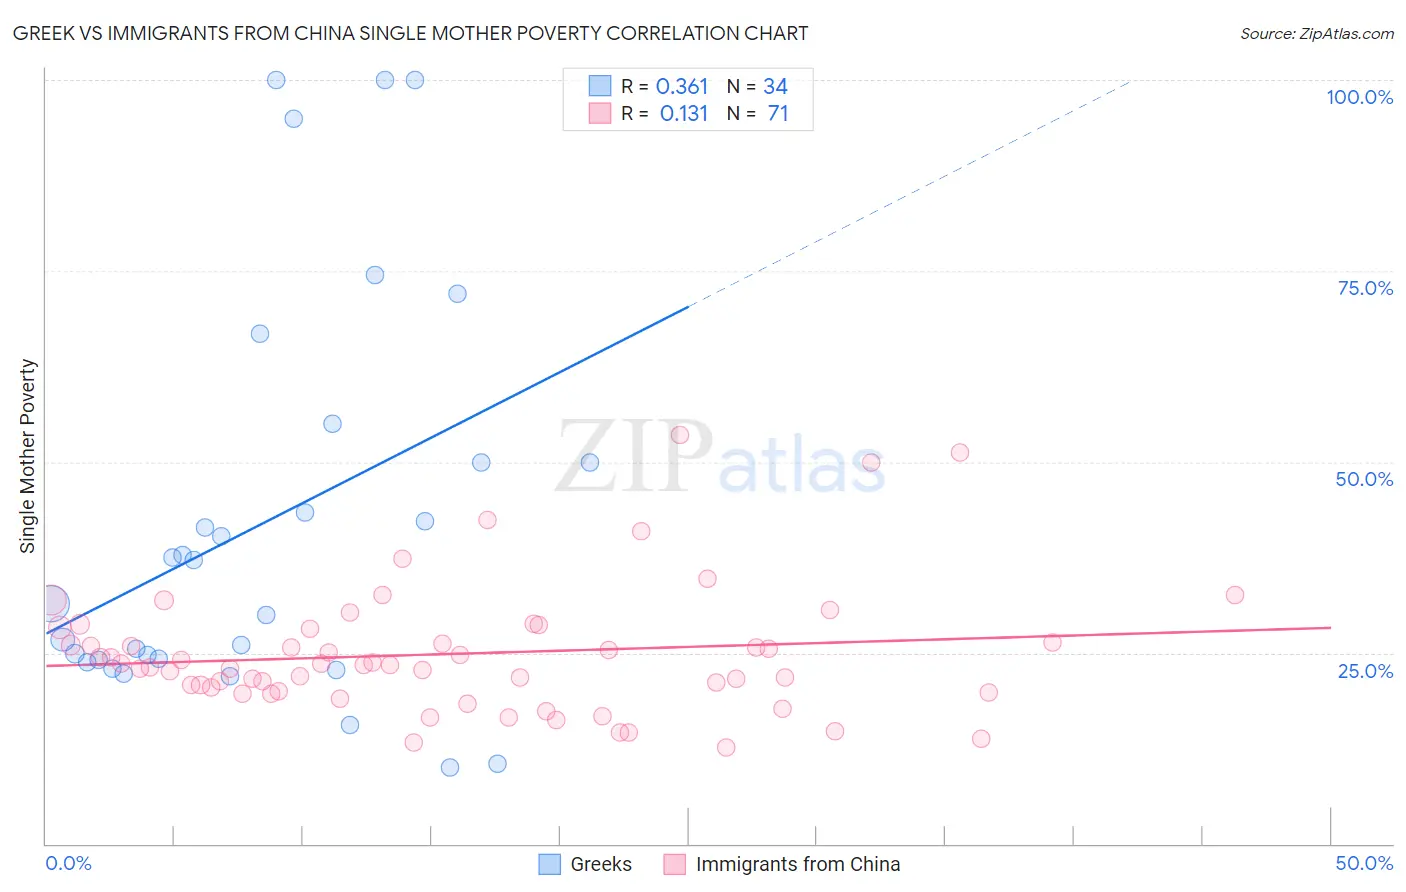 Greek vs Immigrants from China Single Mother Poverty